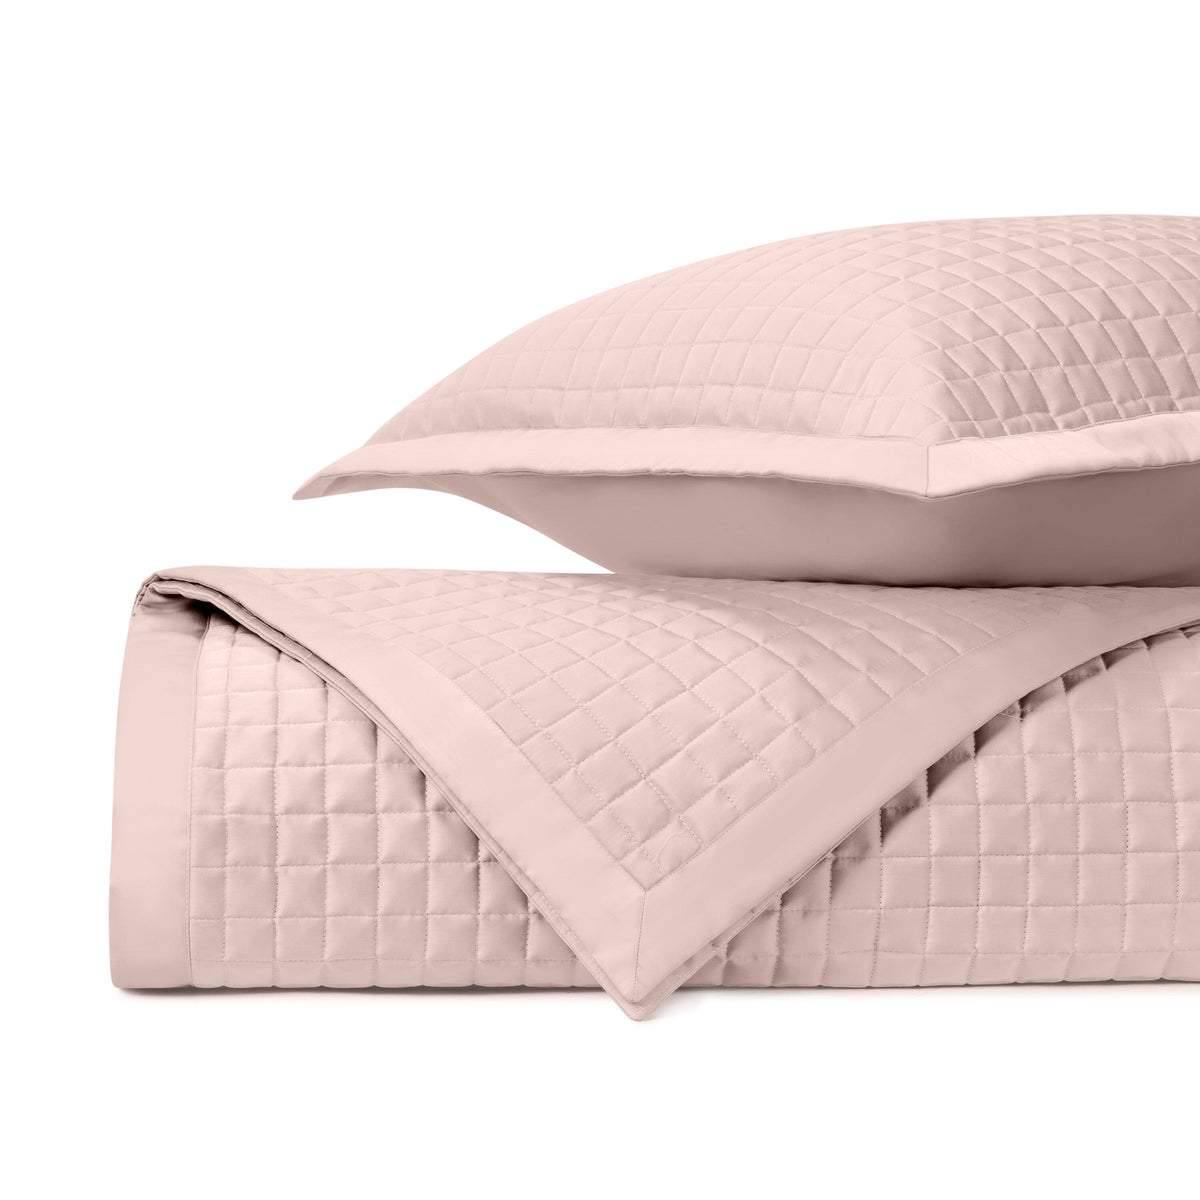 TIME SQUARE Quilted Coverlet in Light Pink by Home Treasures at Fig Linens and Home